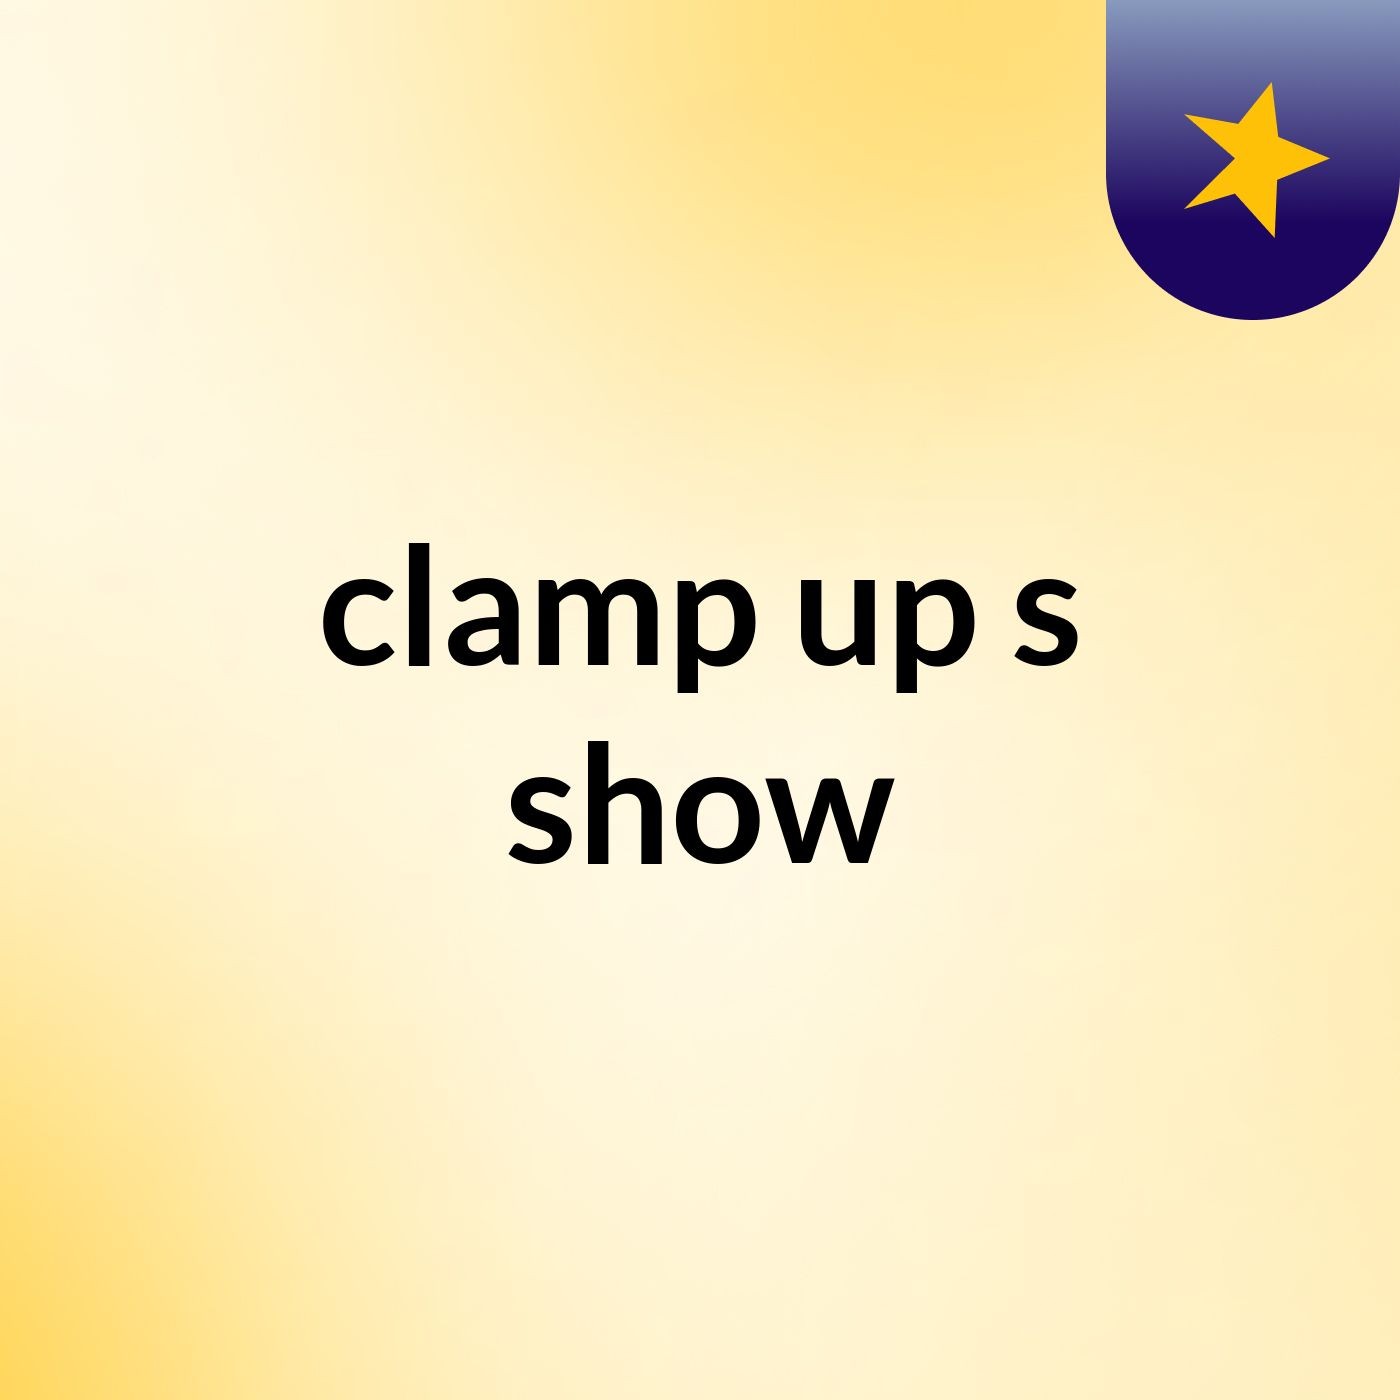 clamp up's show